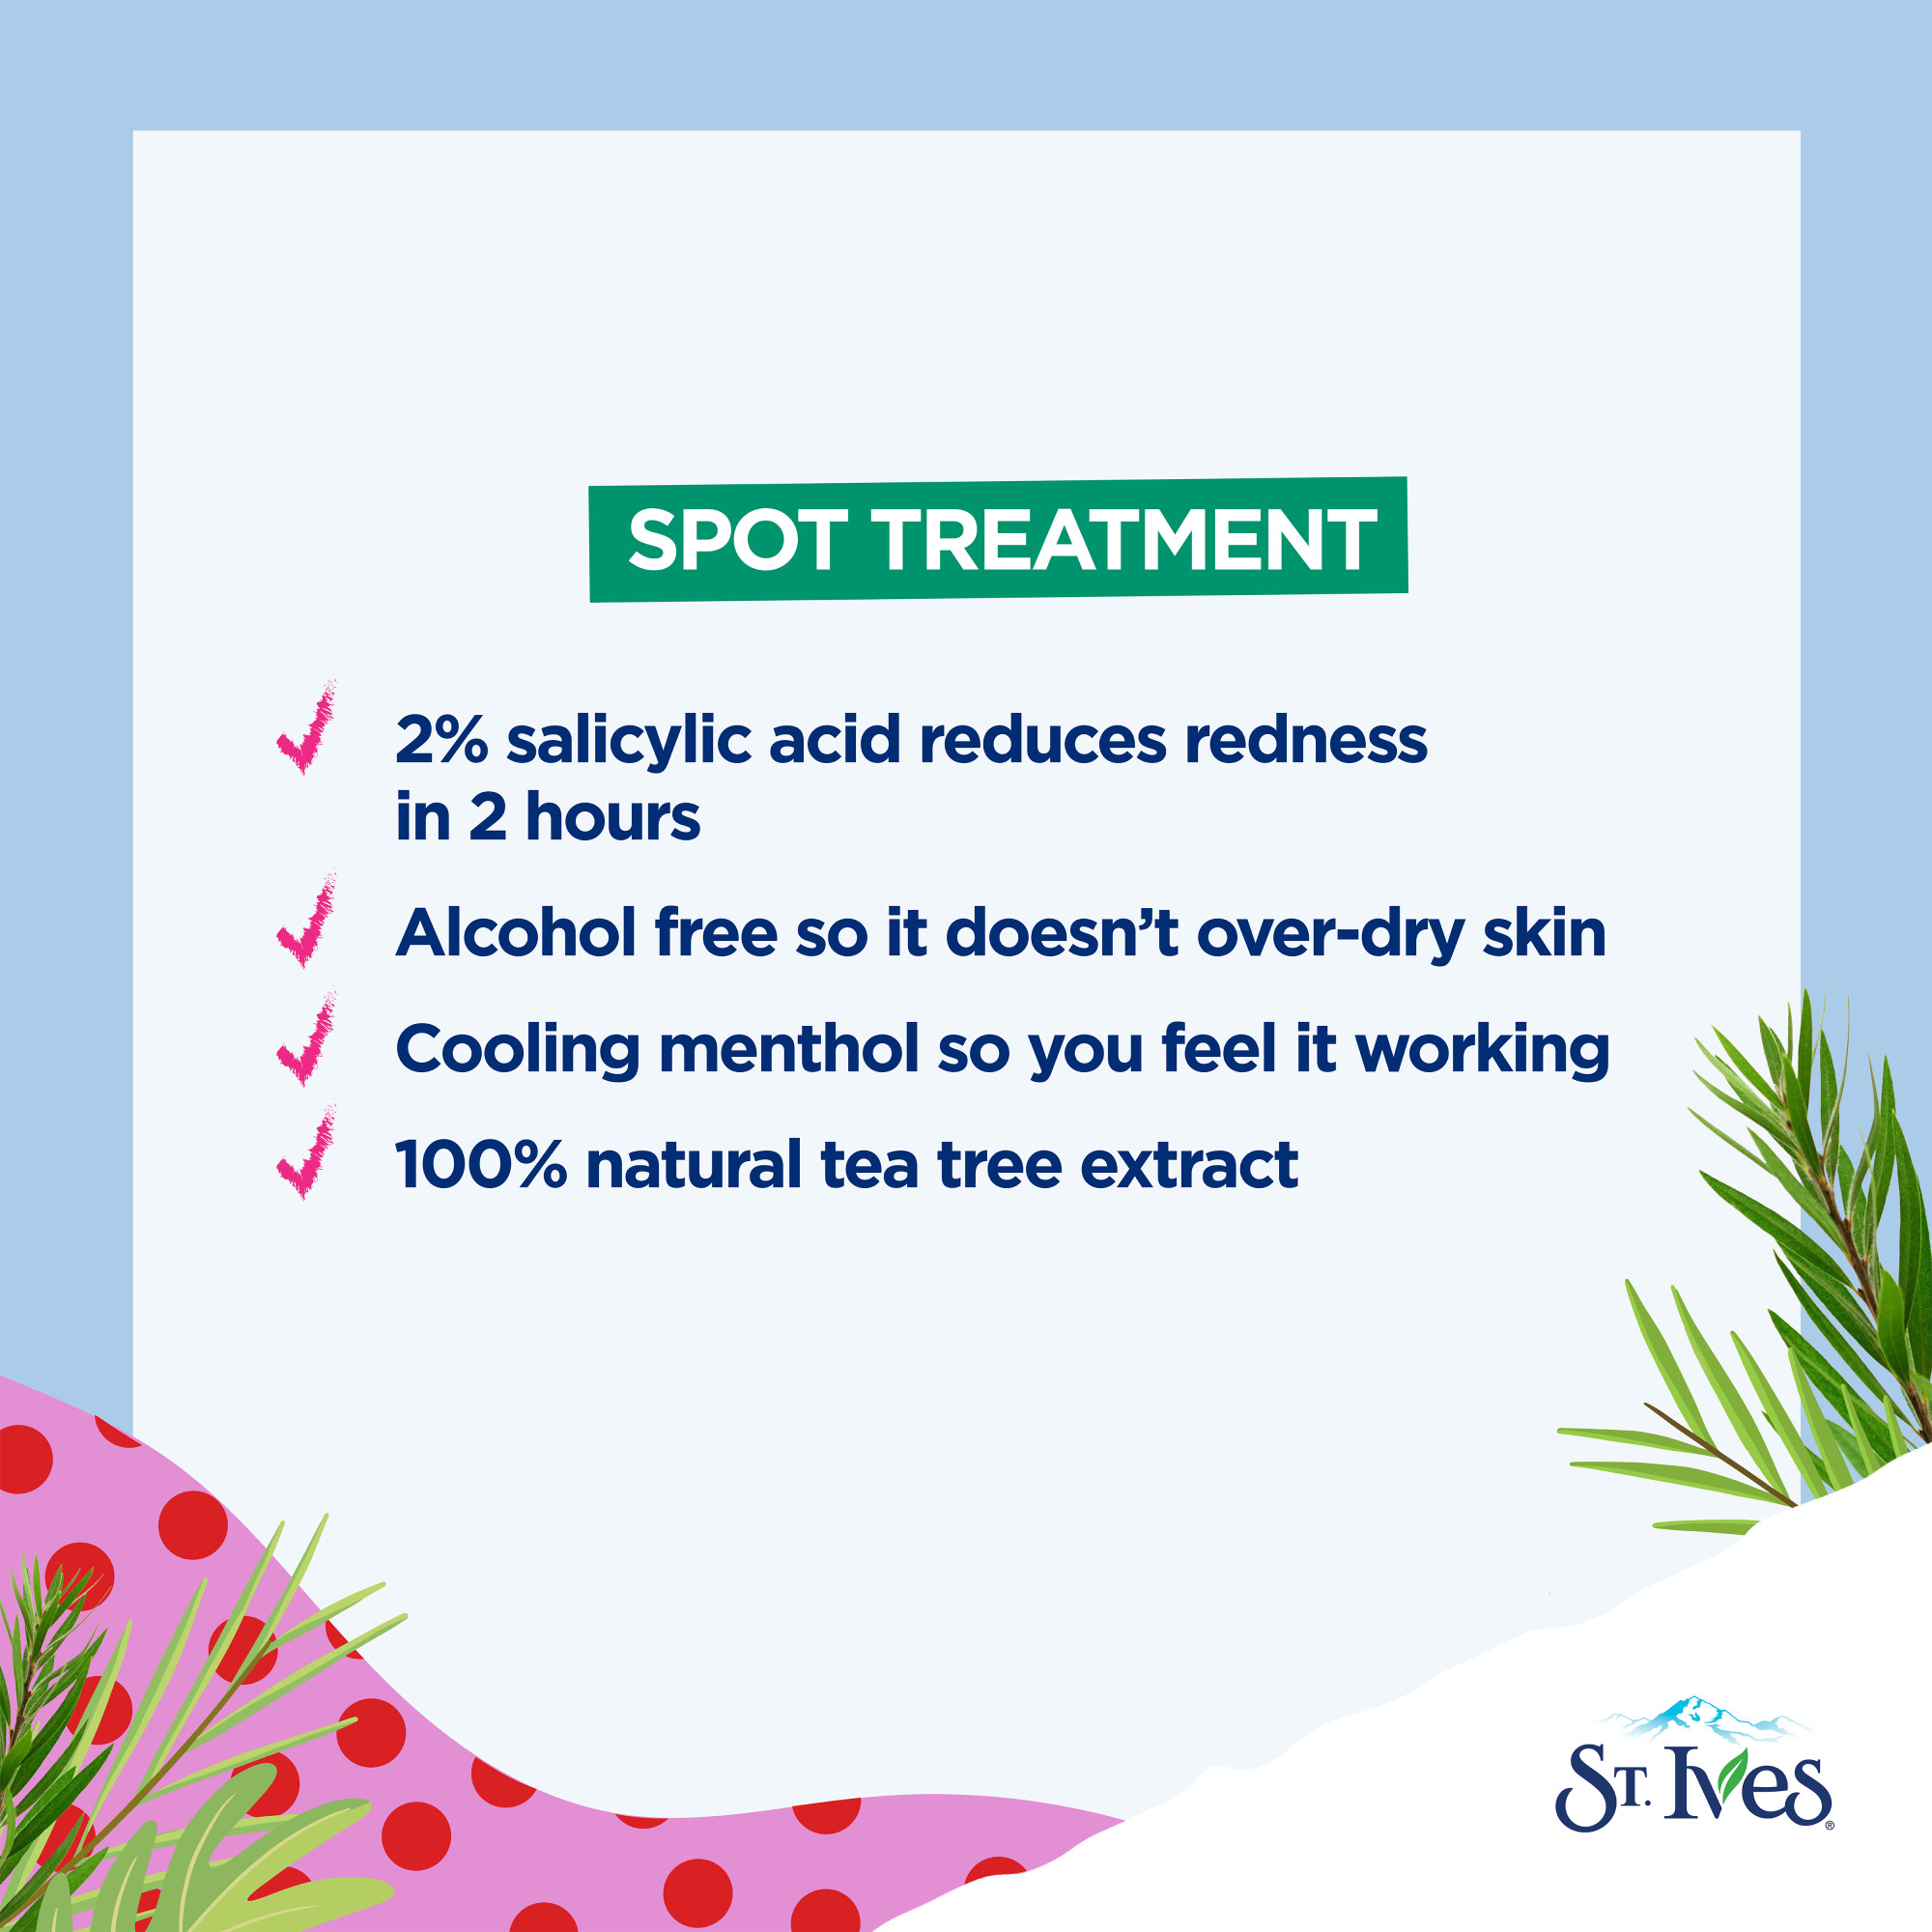 St. Ives Solutions Spot Treatment For Blemish Redness Reduction Acne Control Made with 2% Salicylic Acid and 100% Natural Tea Tree Extract 0.75 oz - image 6 of 16